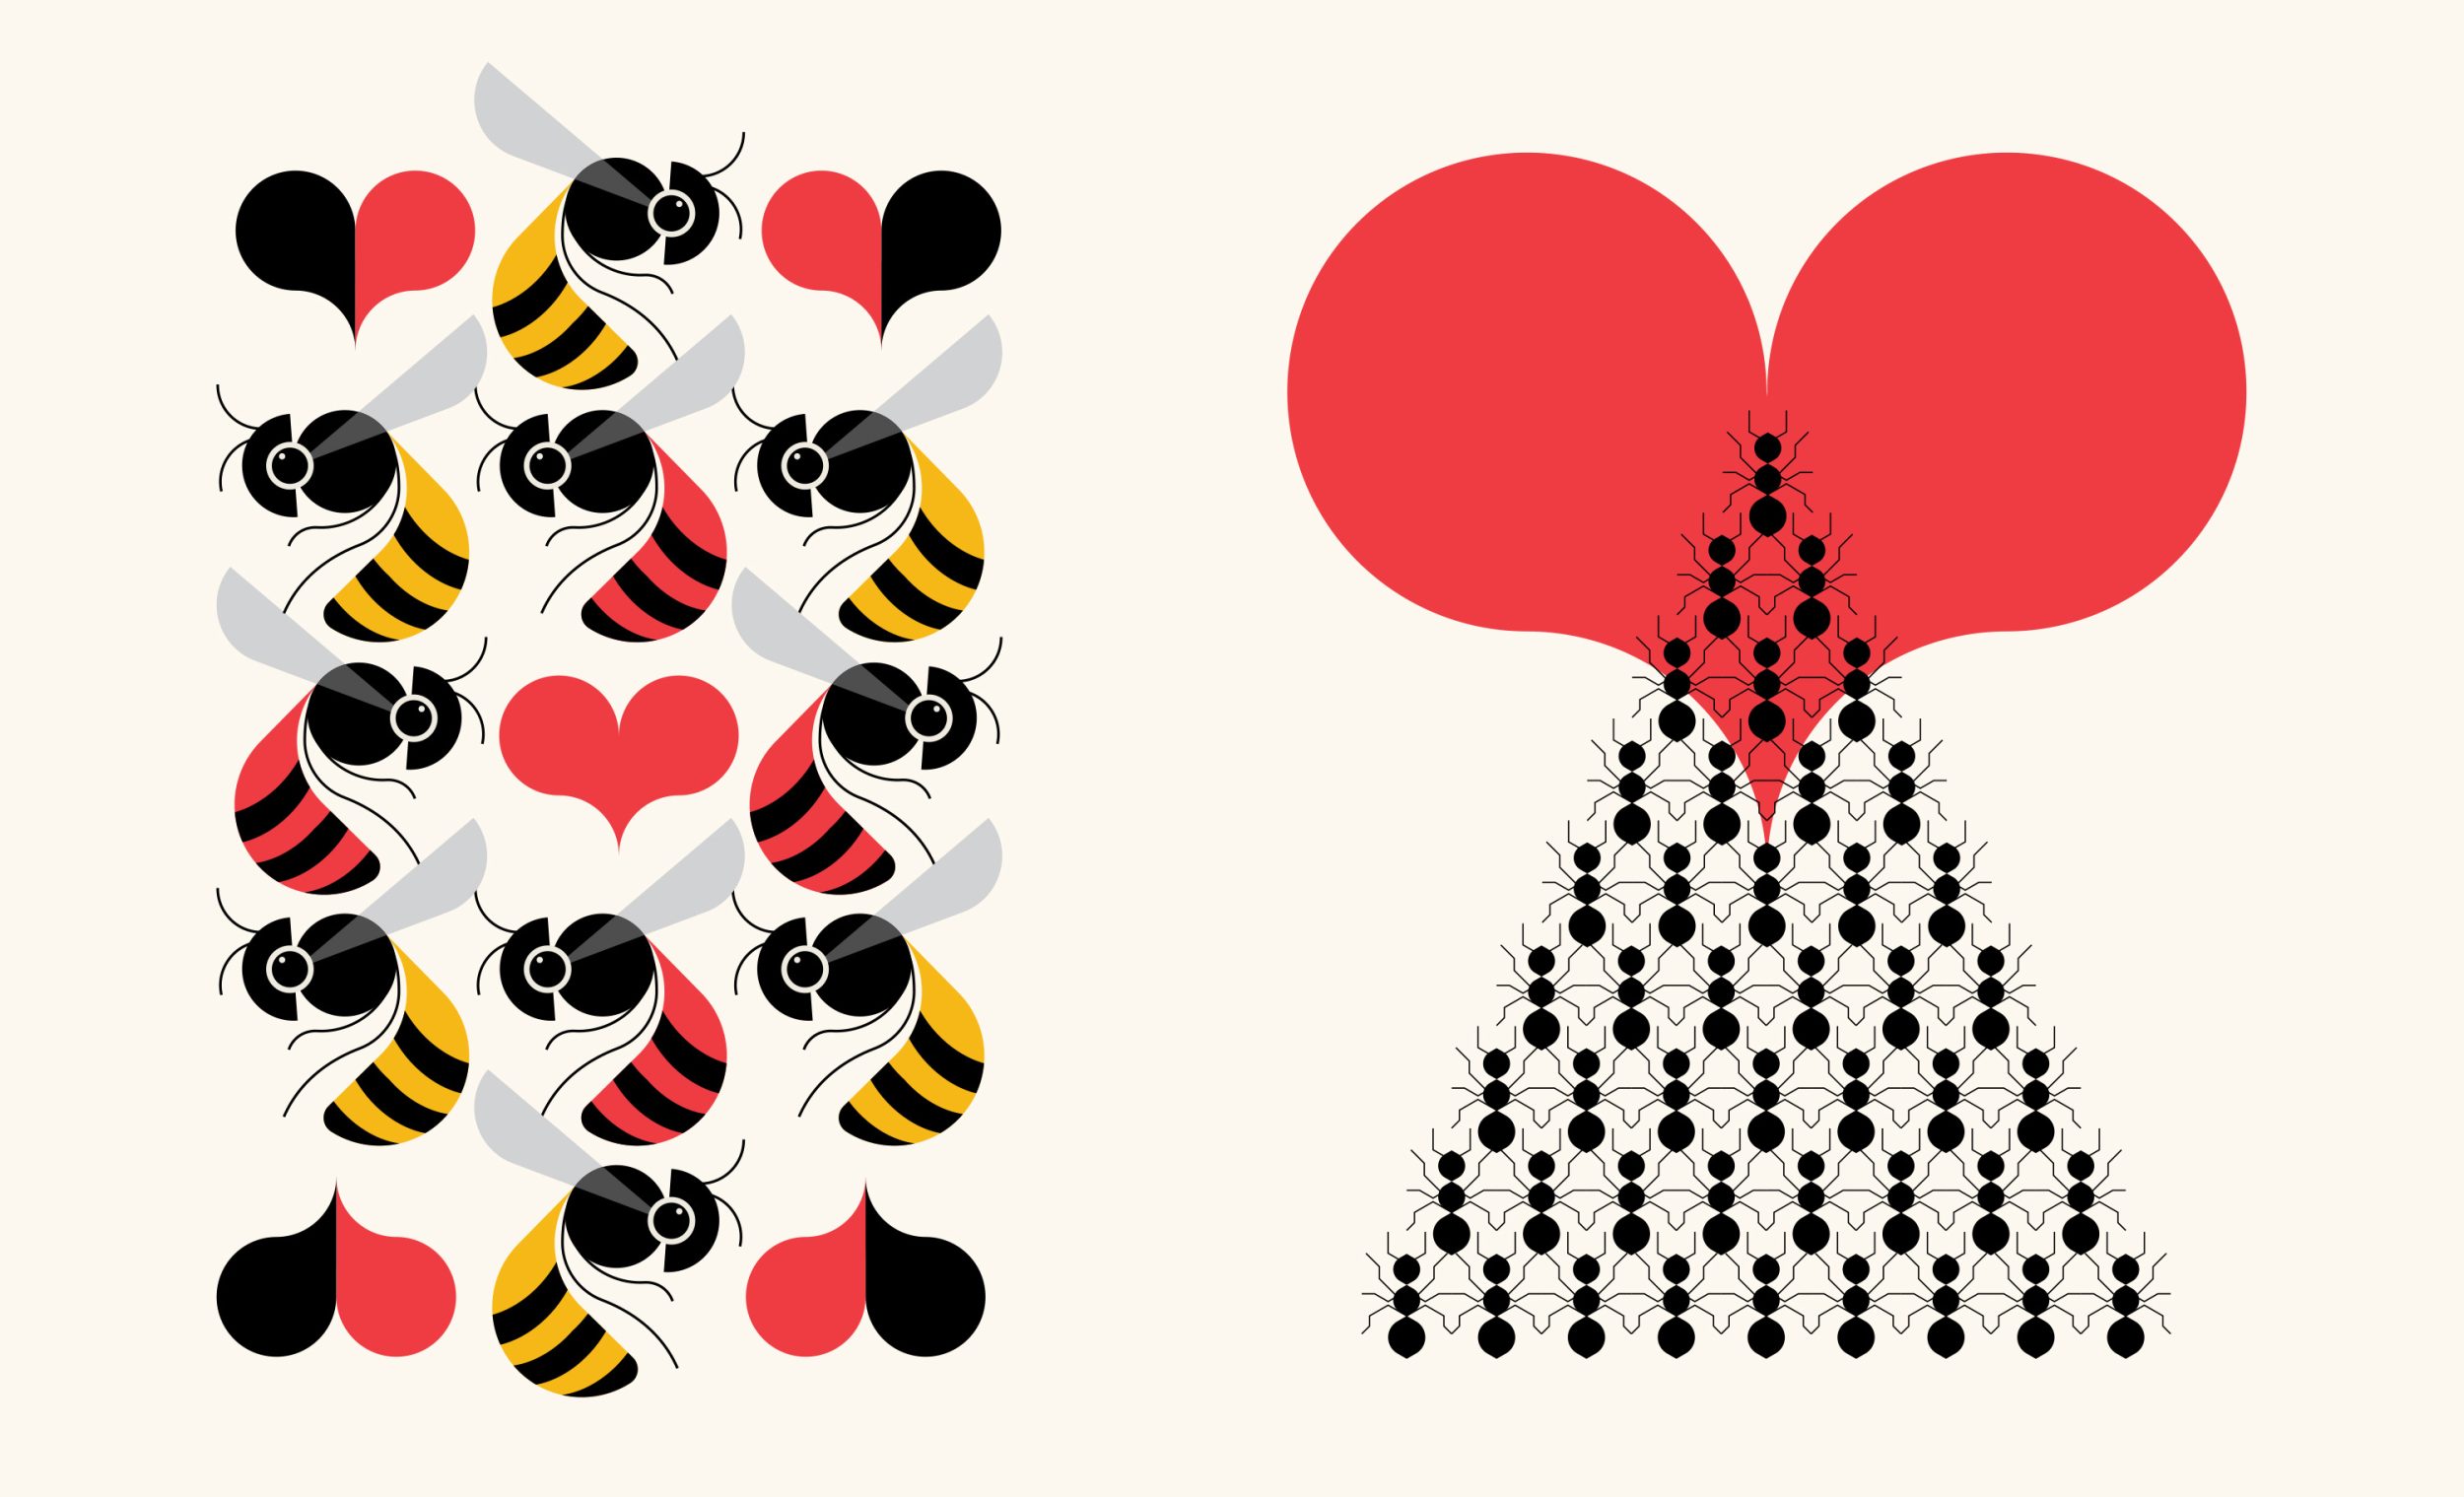 illustration of bees and hearts and ants in triangle formation with red heart